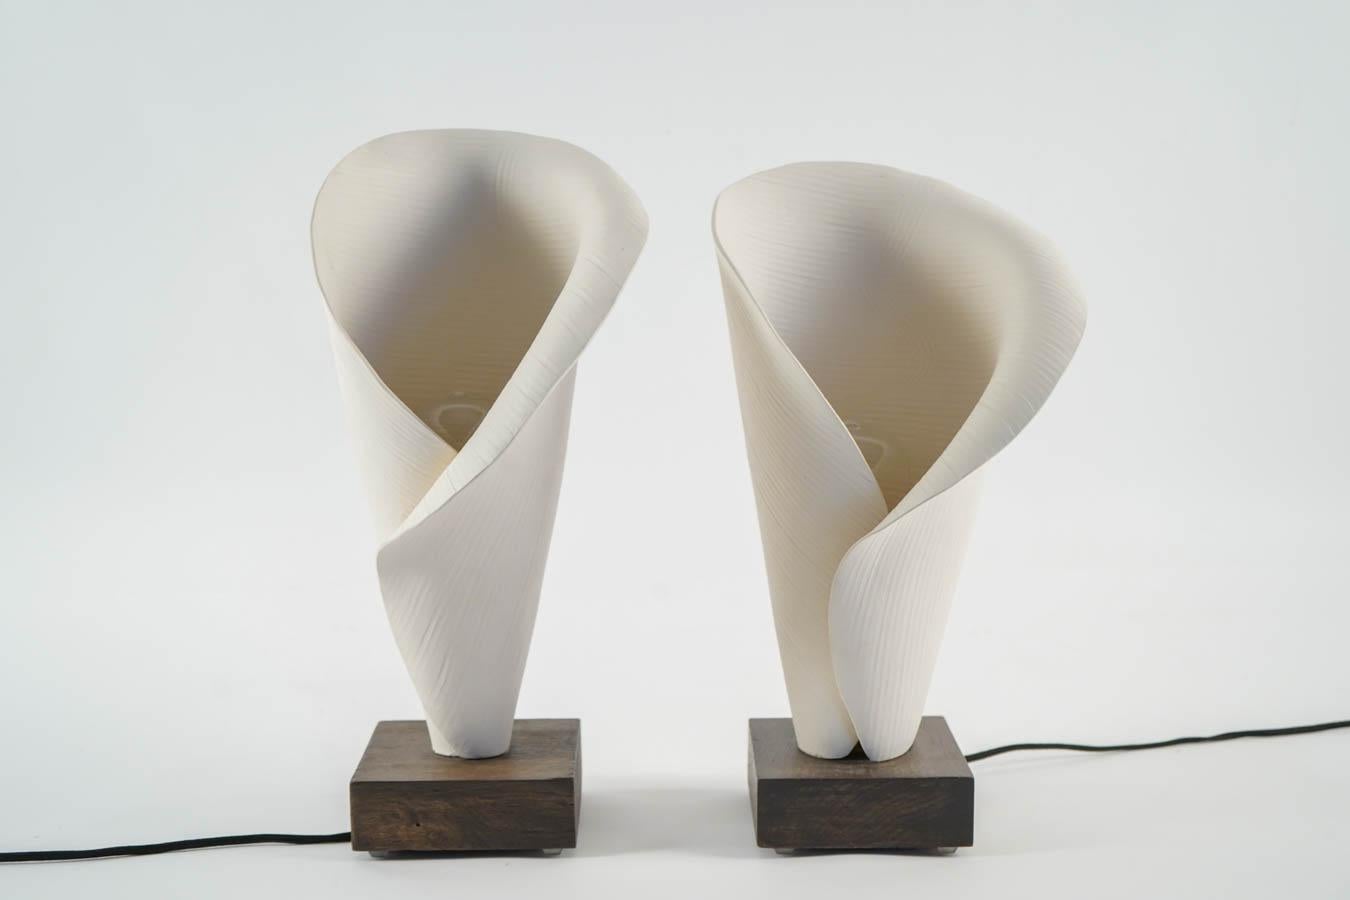 French Pair of Table Lamps, White Ceramic Lamp Made by Hand Mounted on Solid Oak